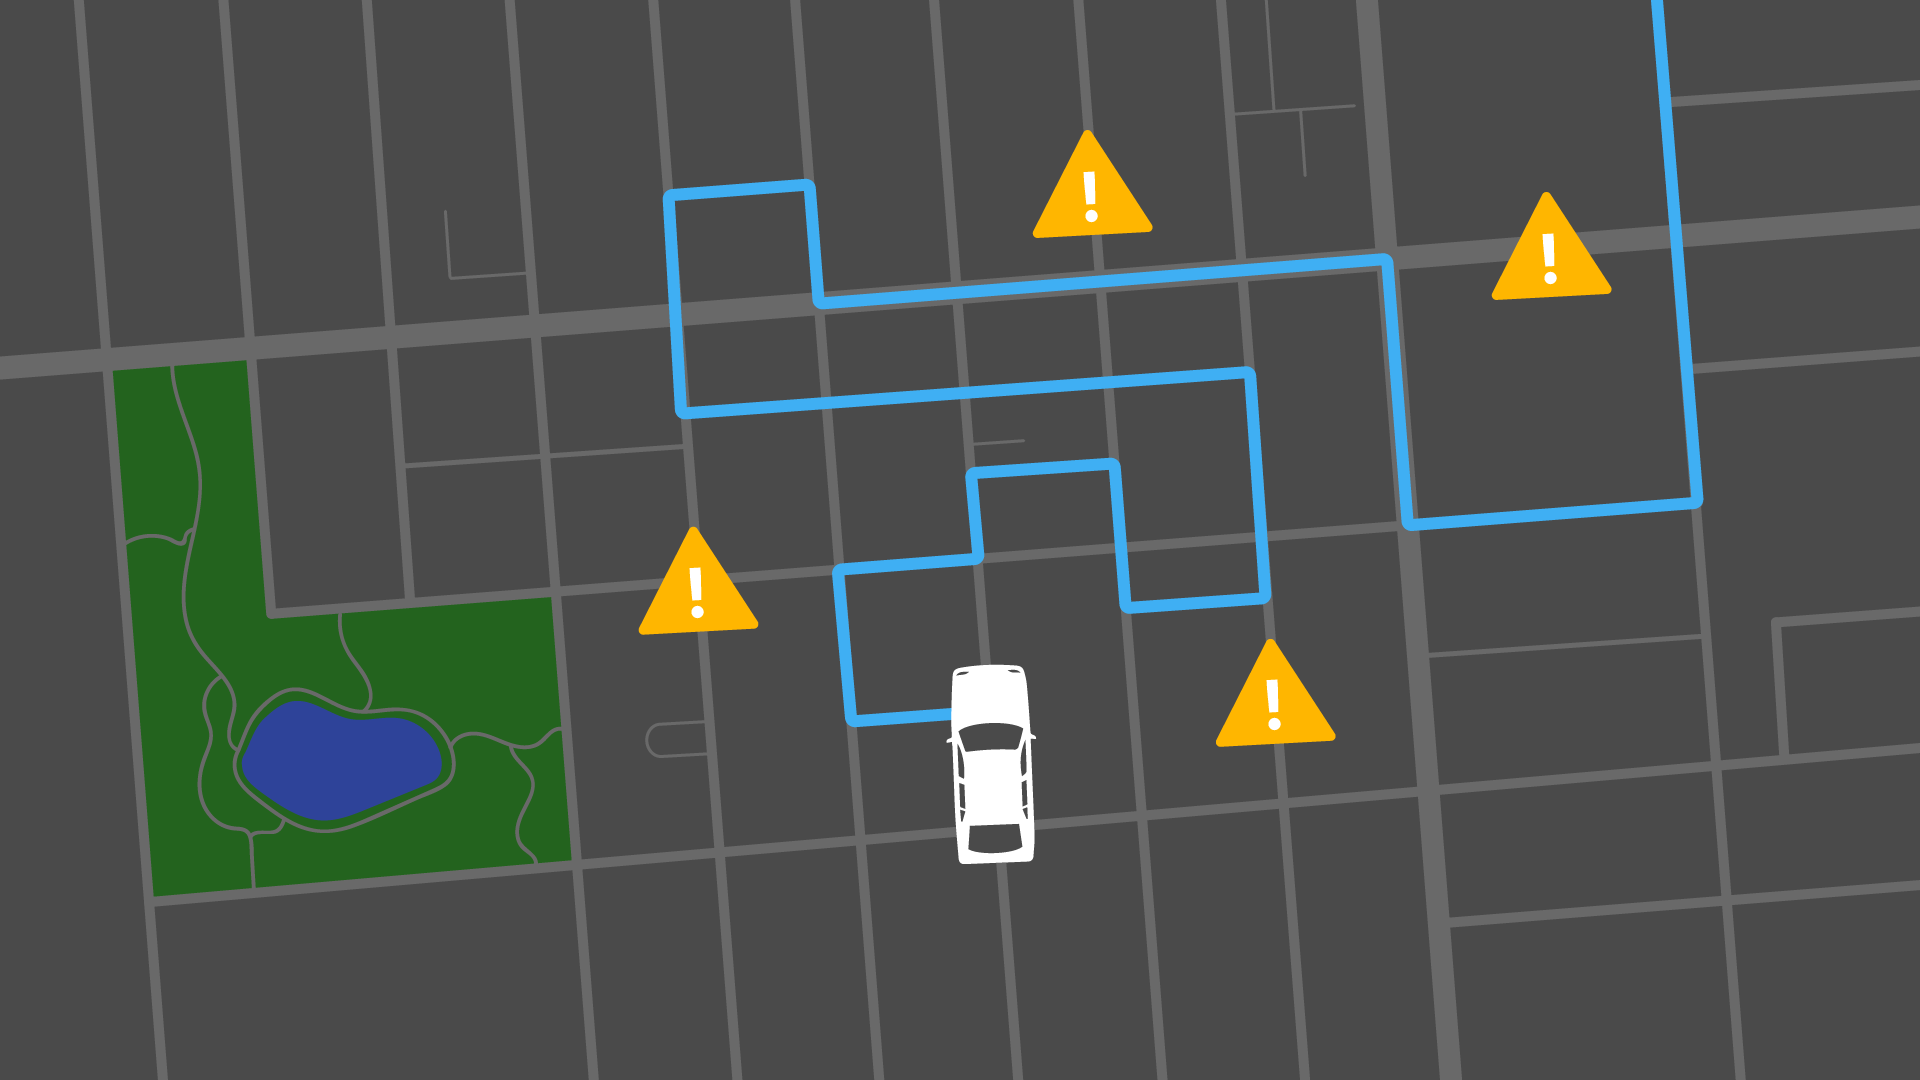 Uber route map with hazard signs placed on a twisty route